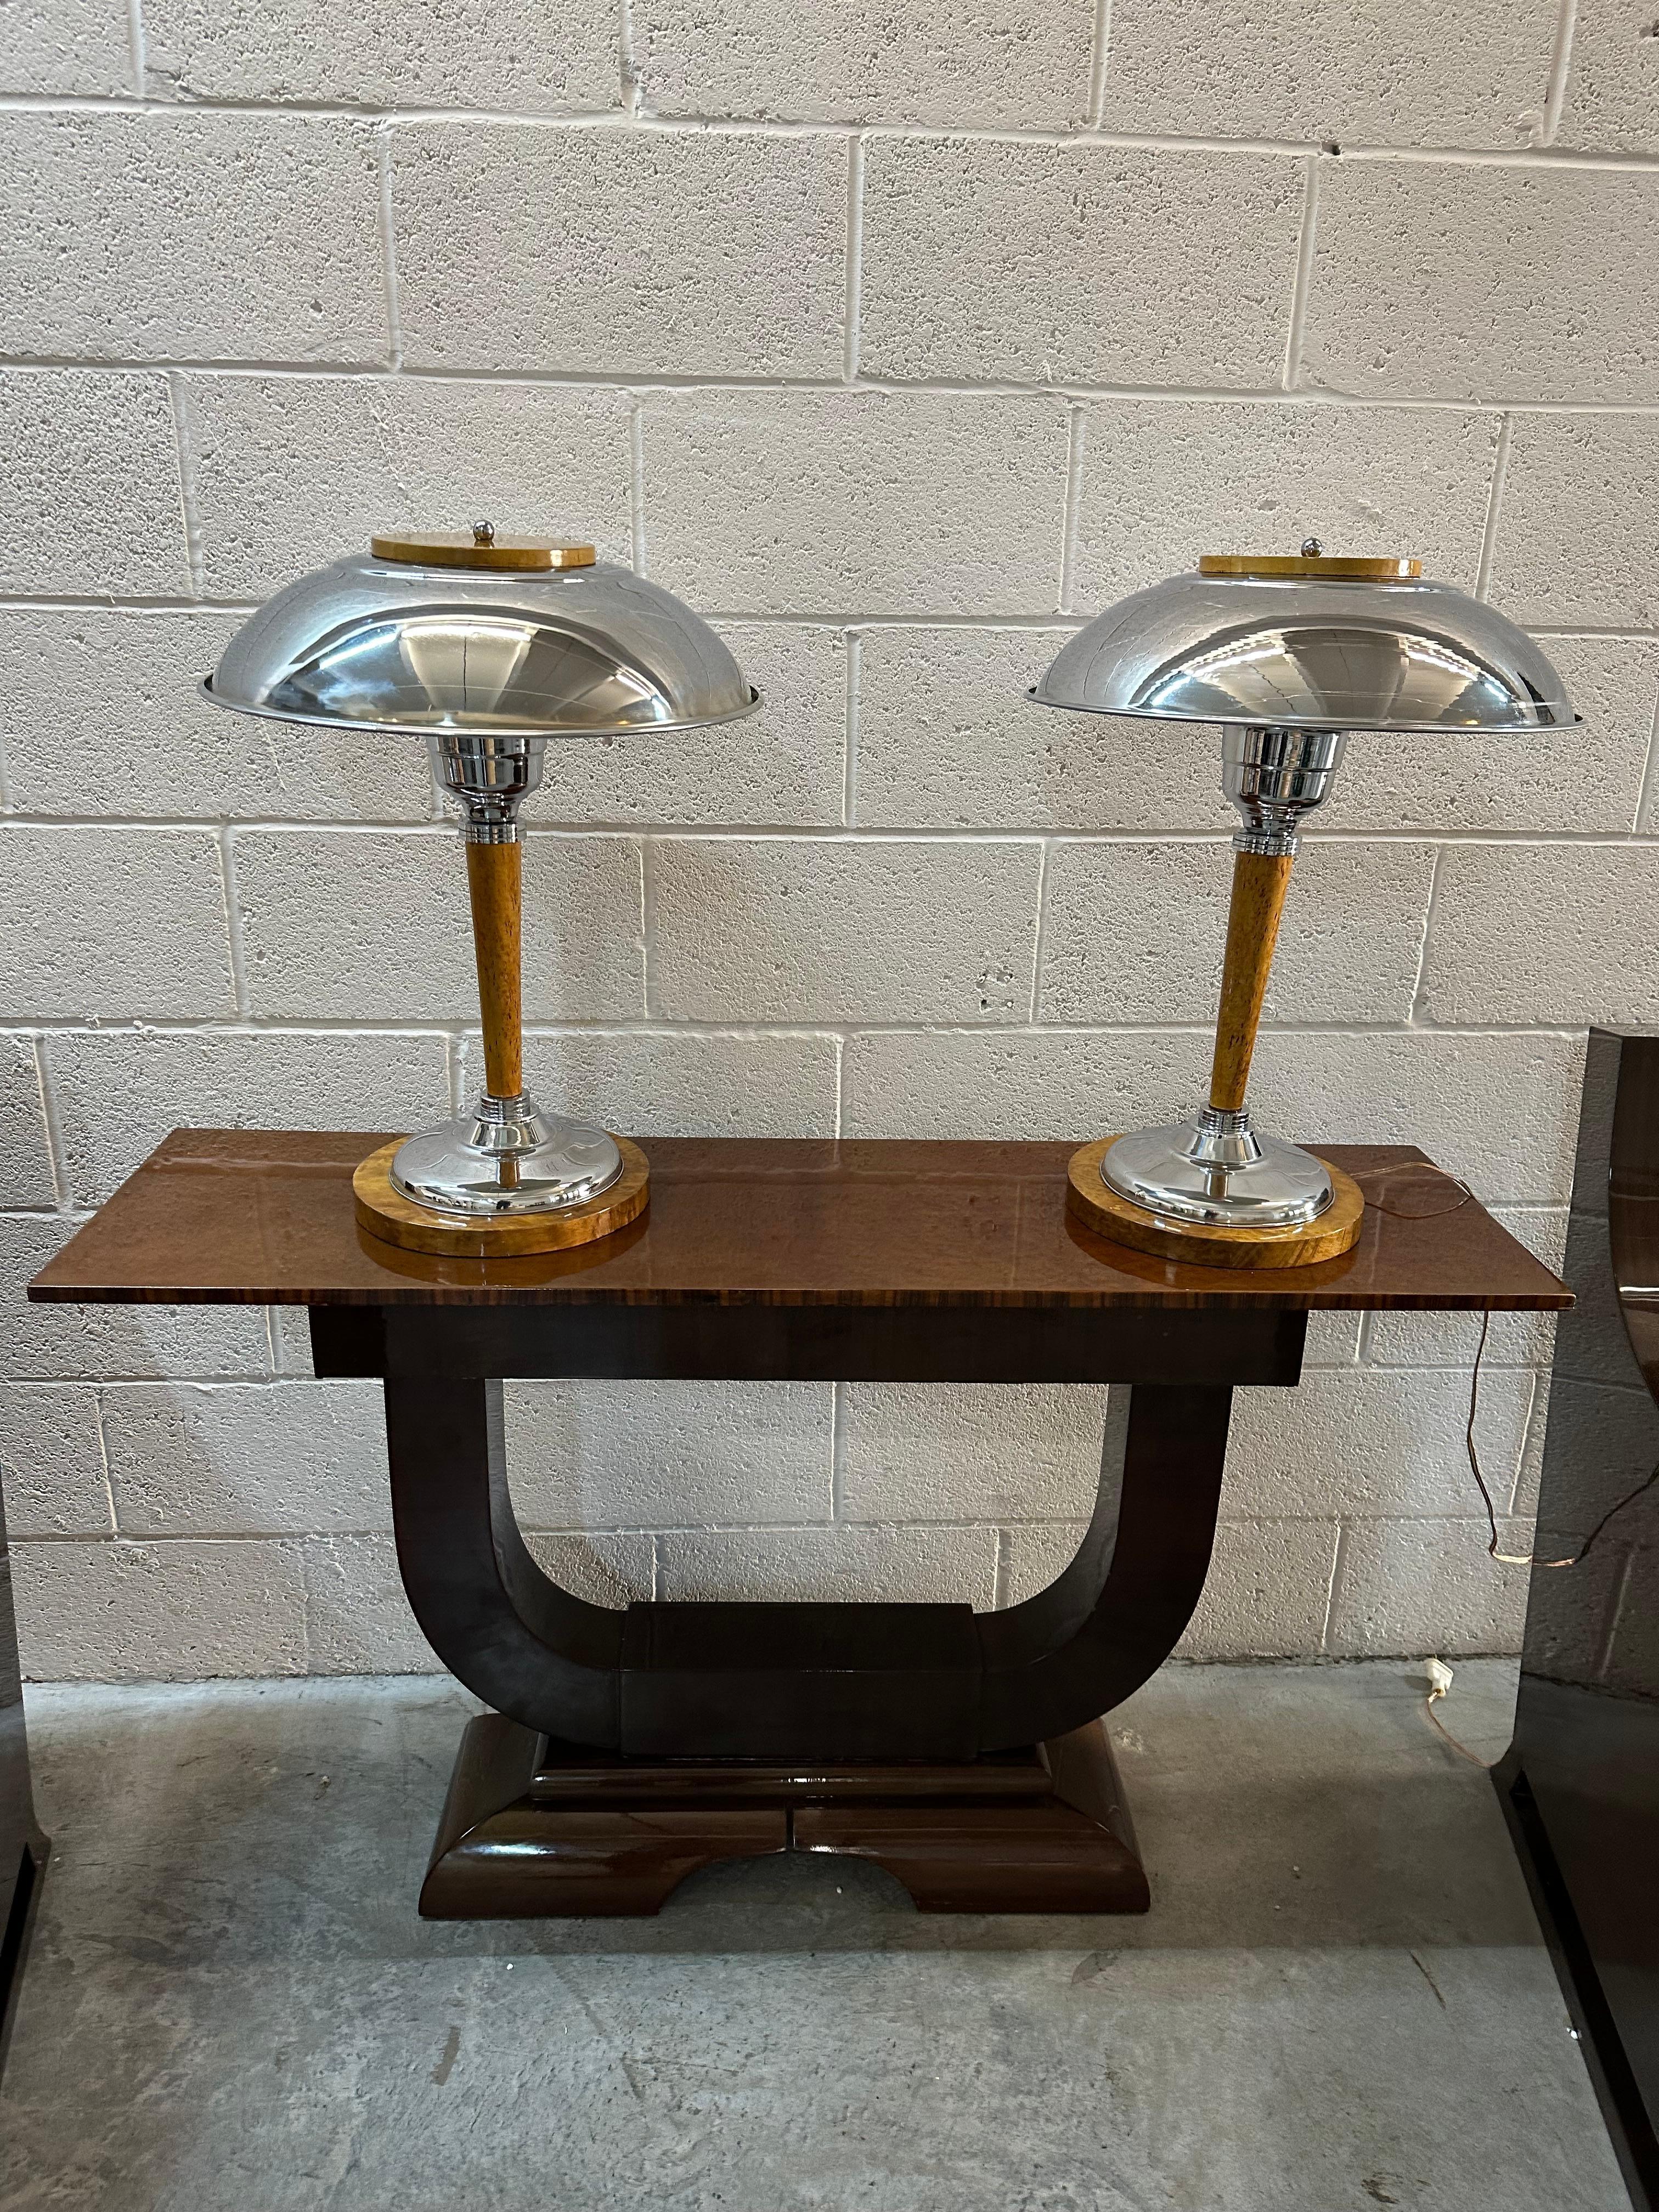 Pair of Art Deco Table Lamps in wood and chrome, 1920, France For Sale 6